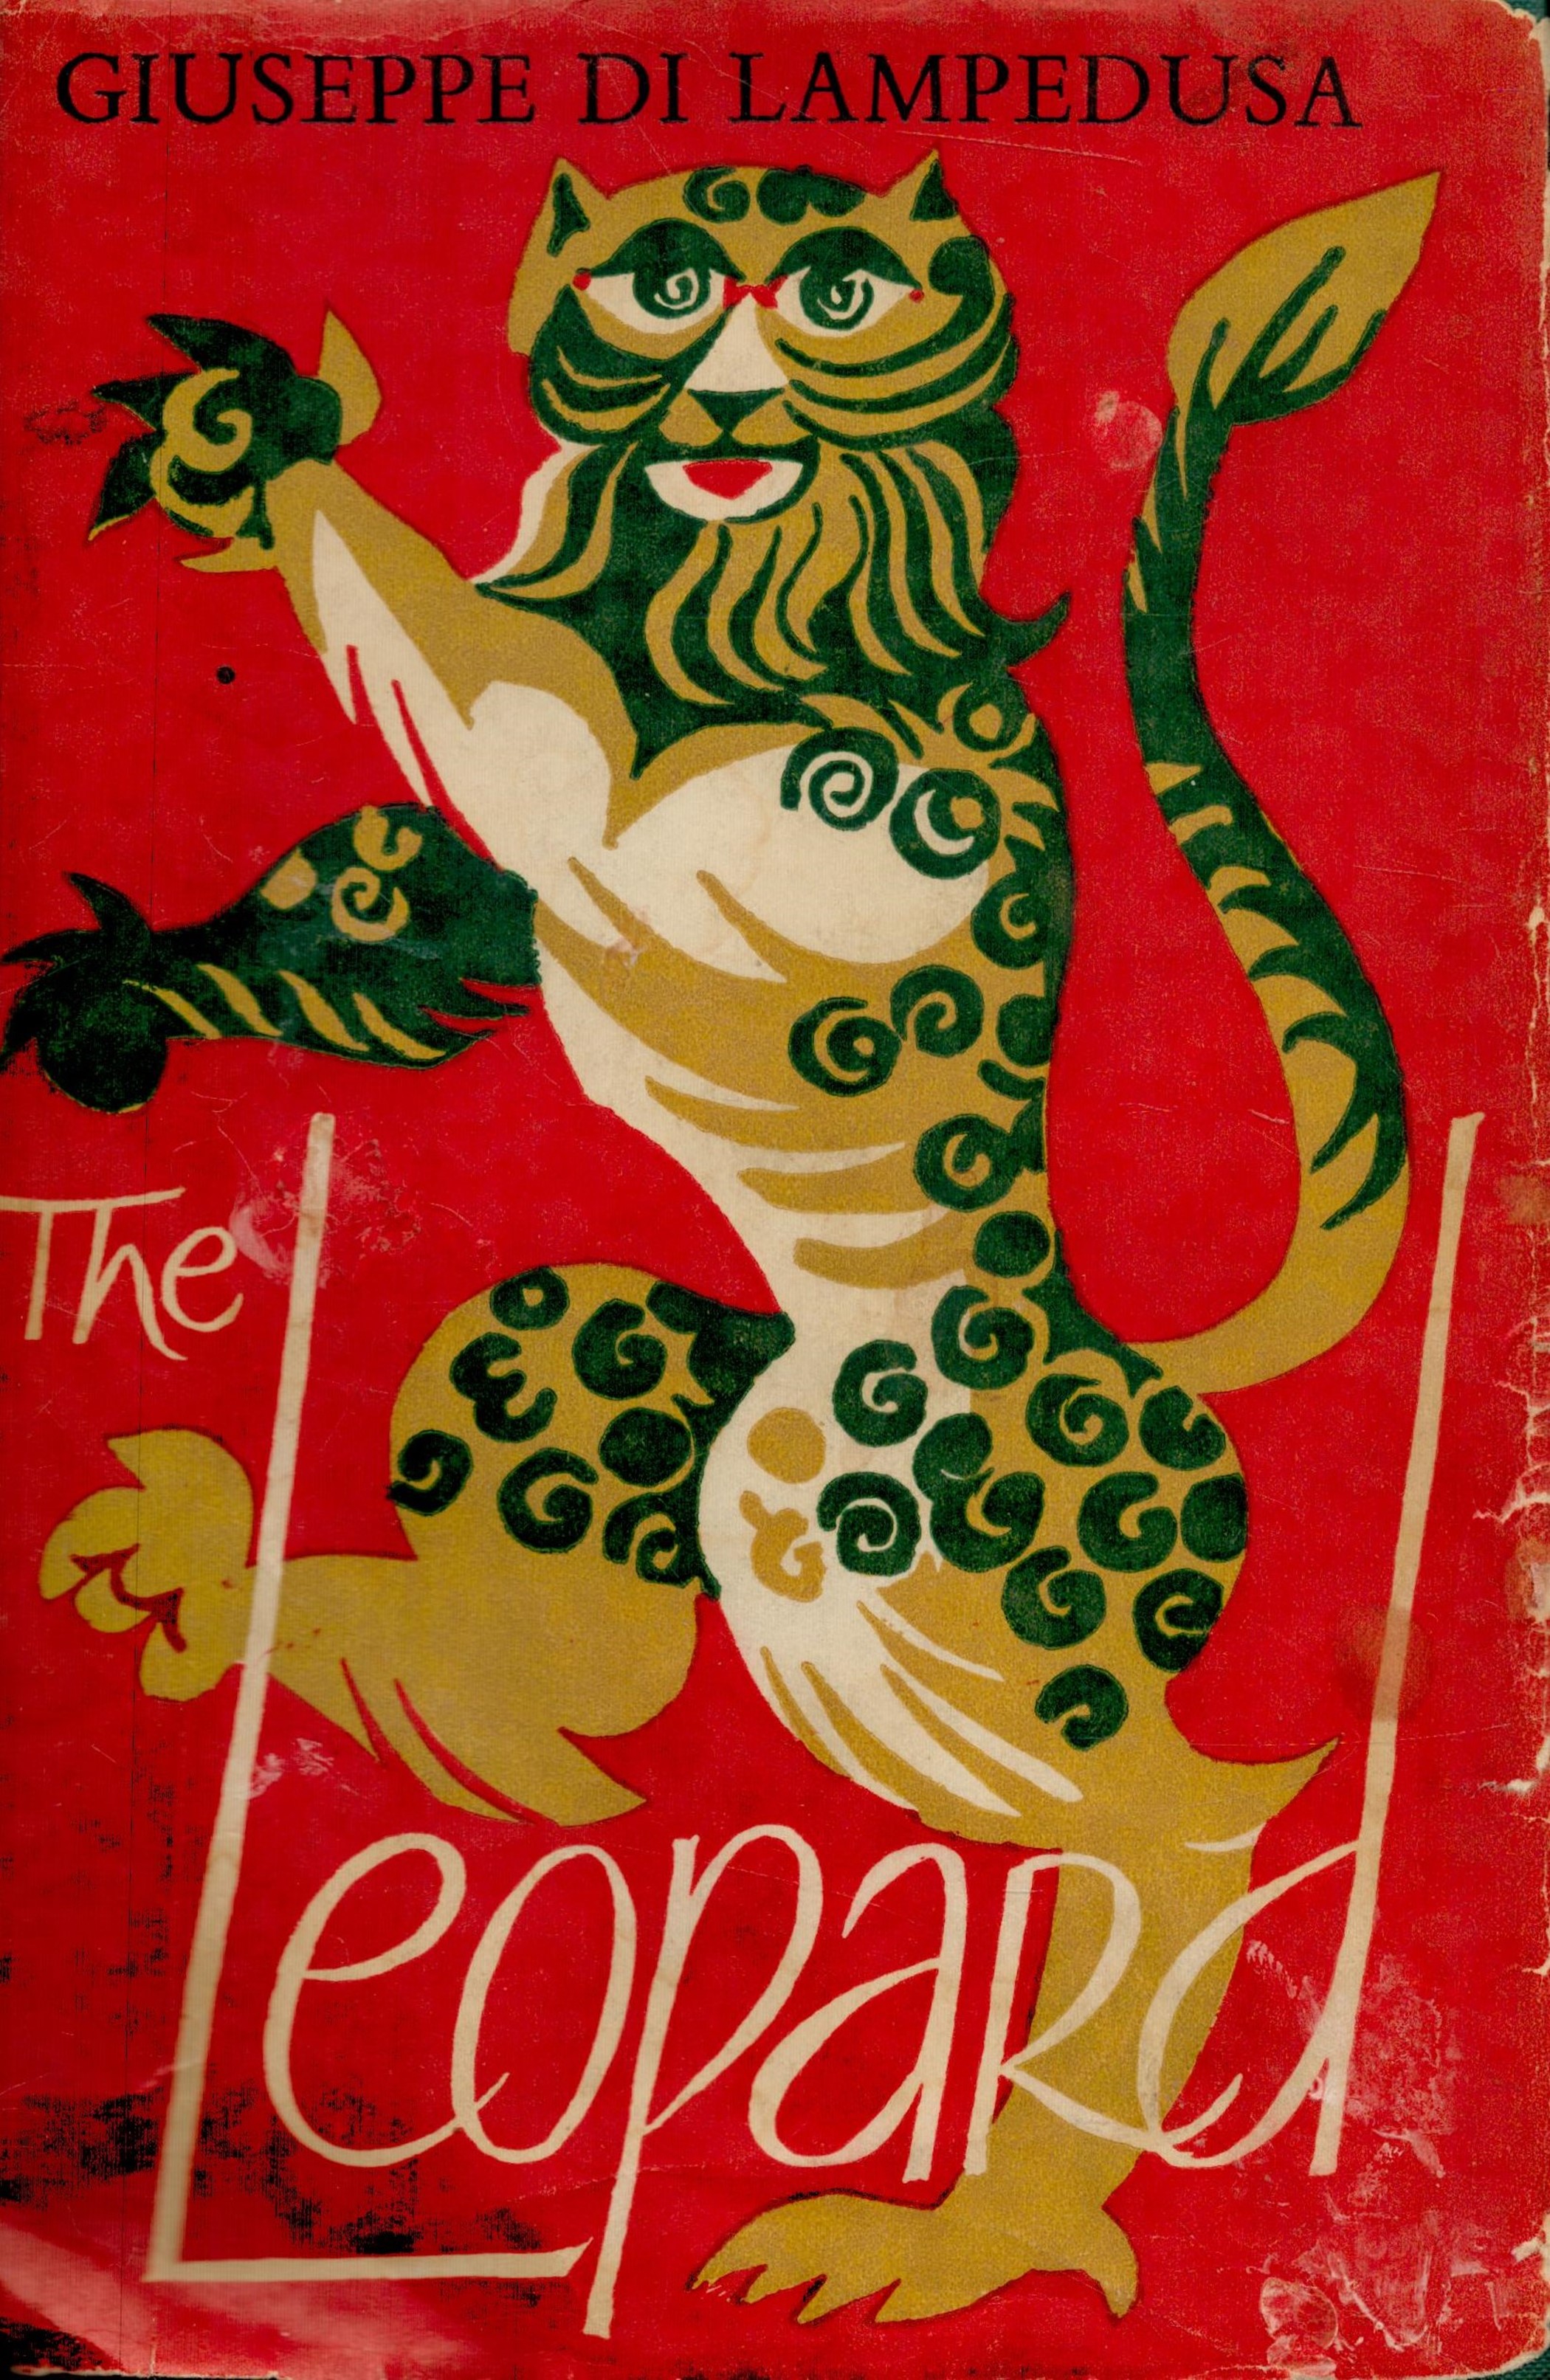 The Leopard by Giuseppe Di Lampedusa Translated by Archibald Colquhoun 1960 fourth Impression